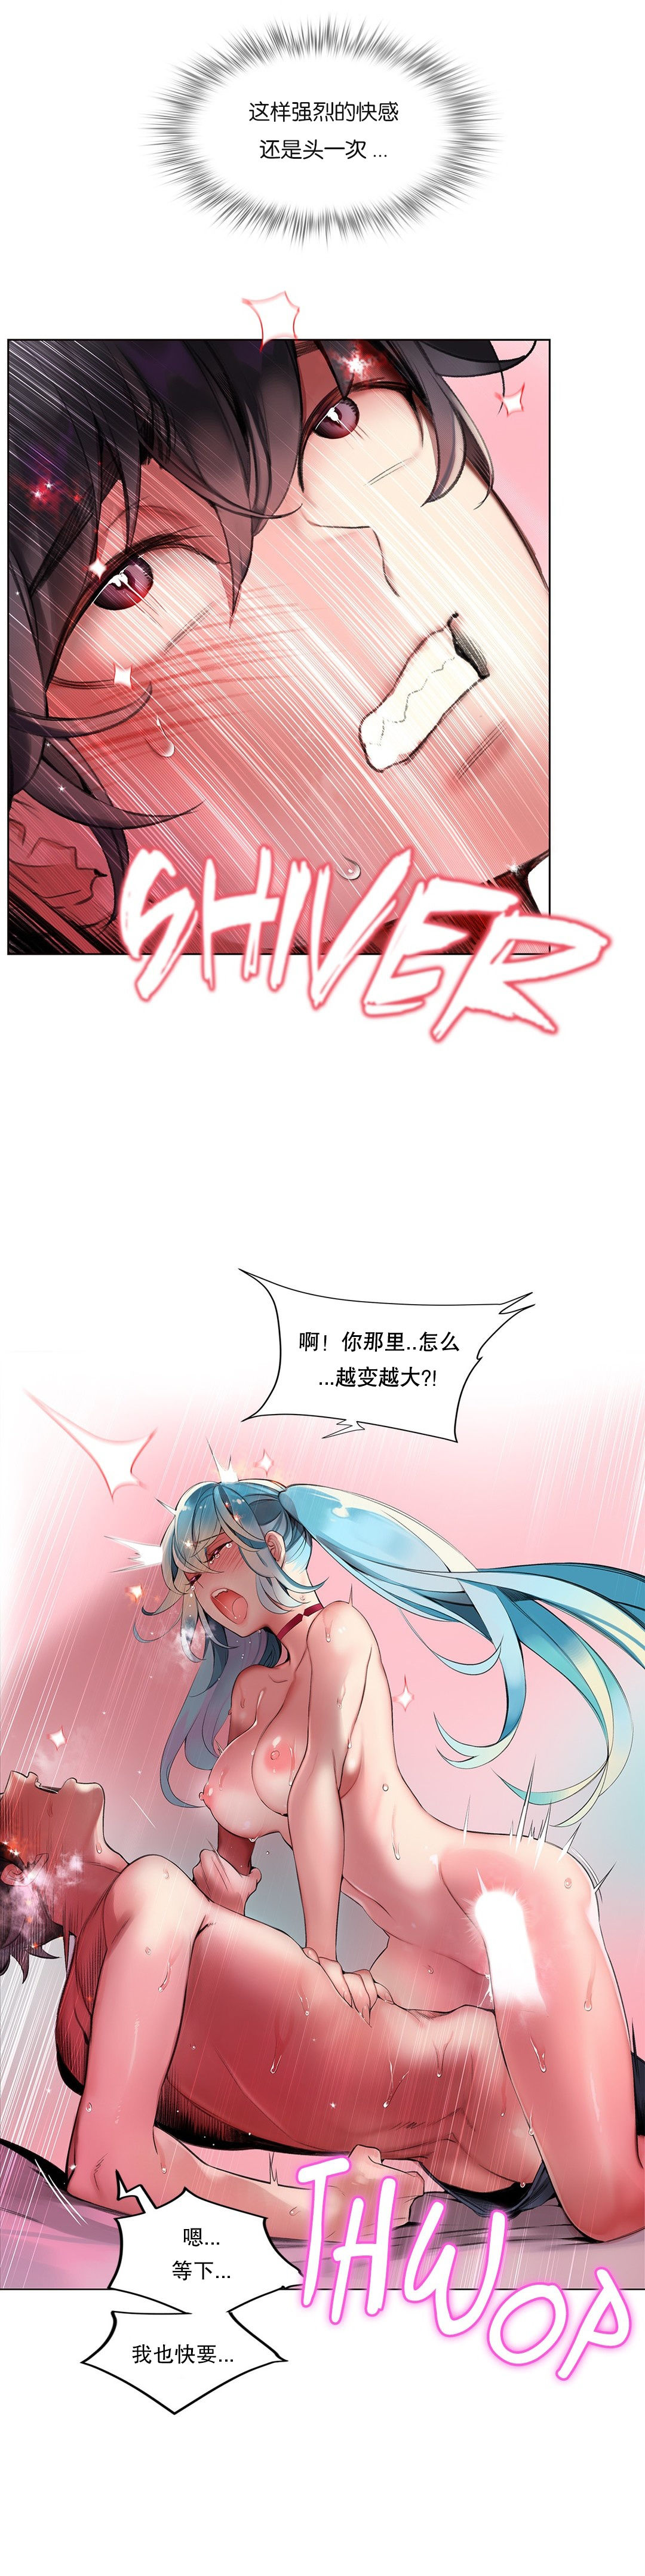 [Juder] Lilith`s Cord (第二季) Ch.61-65 [Chinese] [aaatwist个人汉化] [Ongoing] 